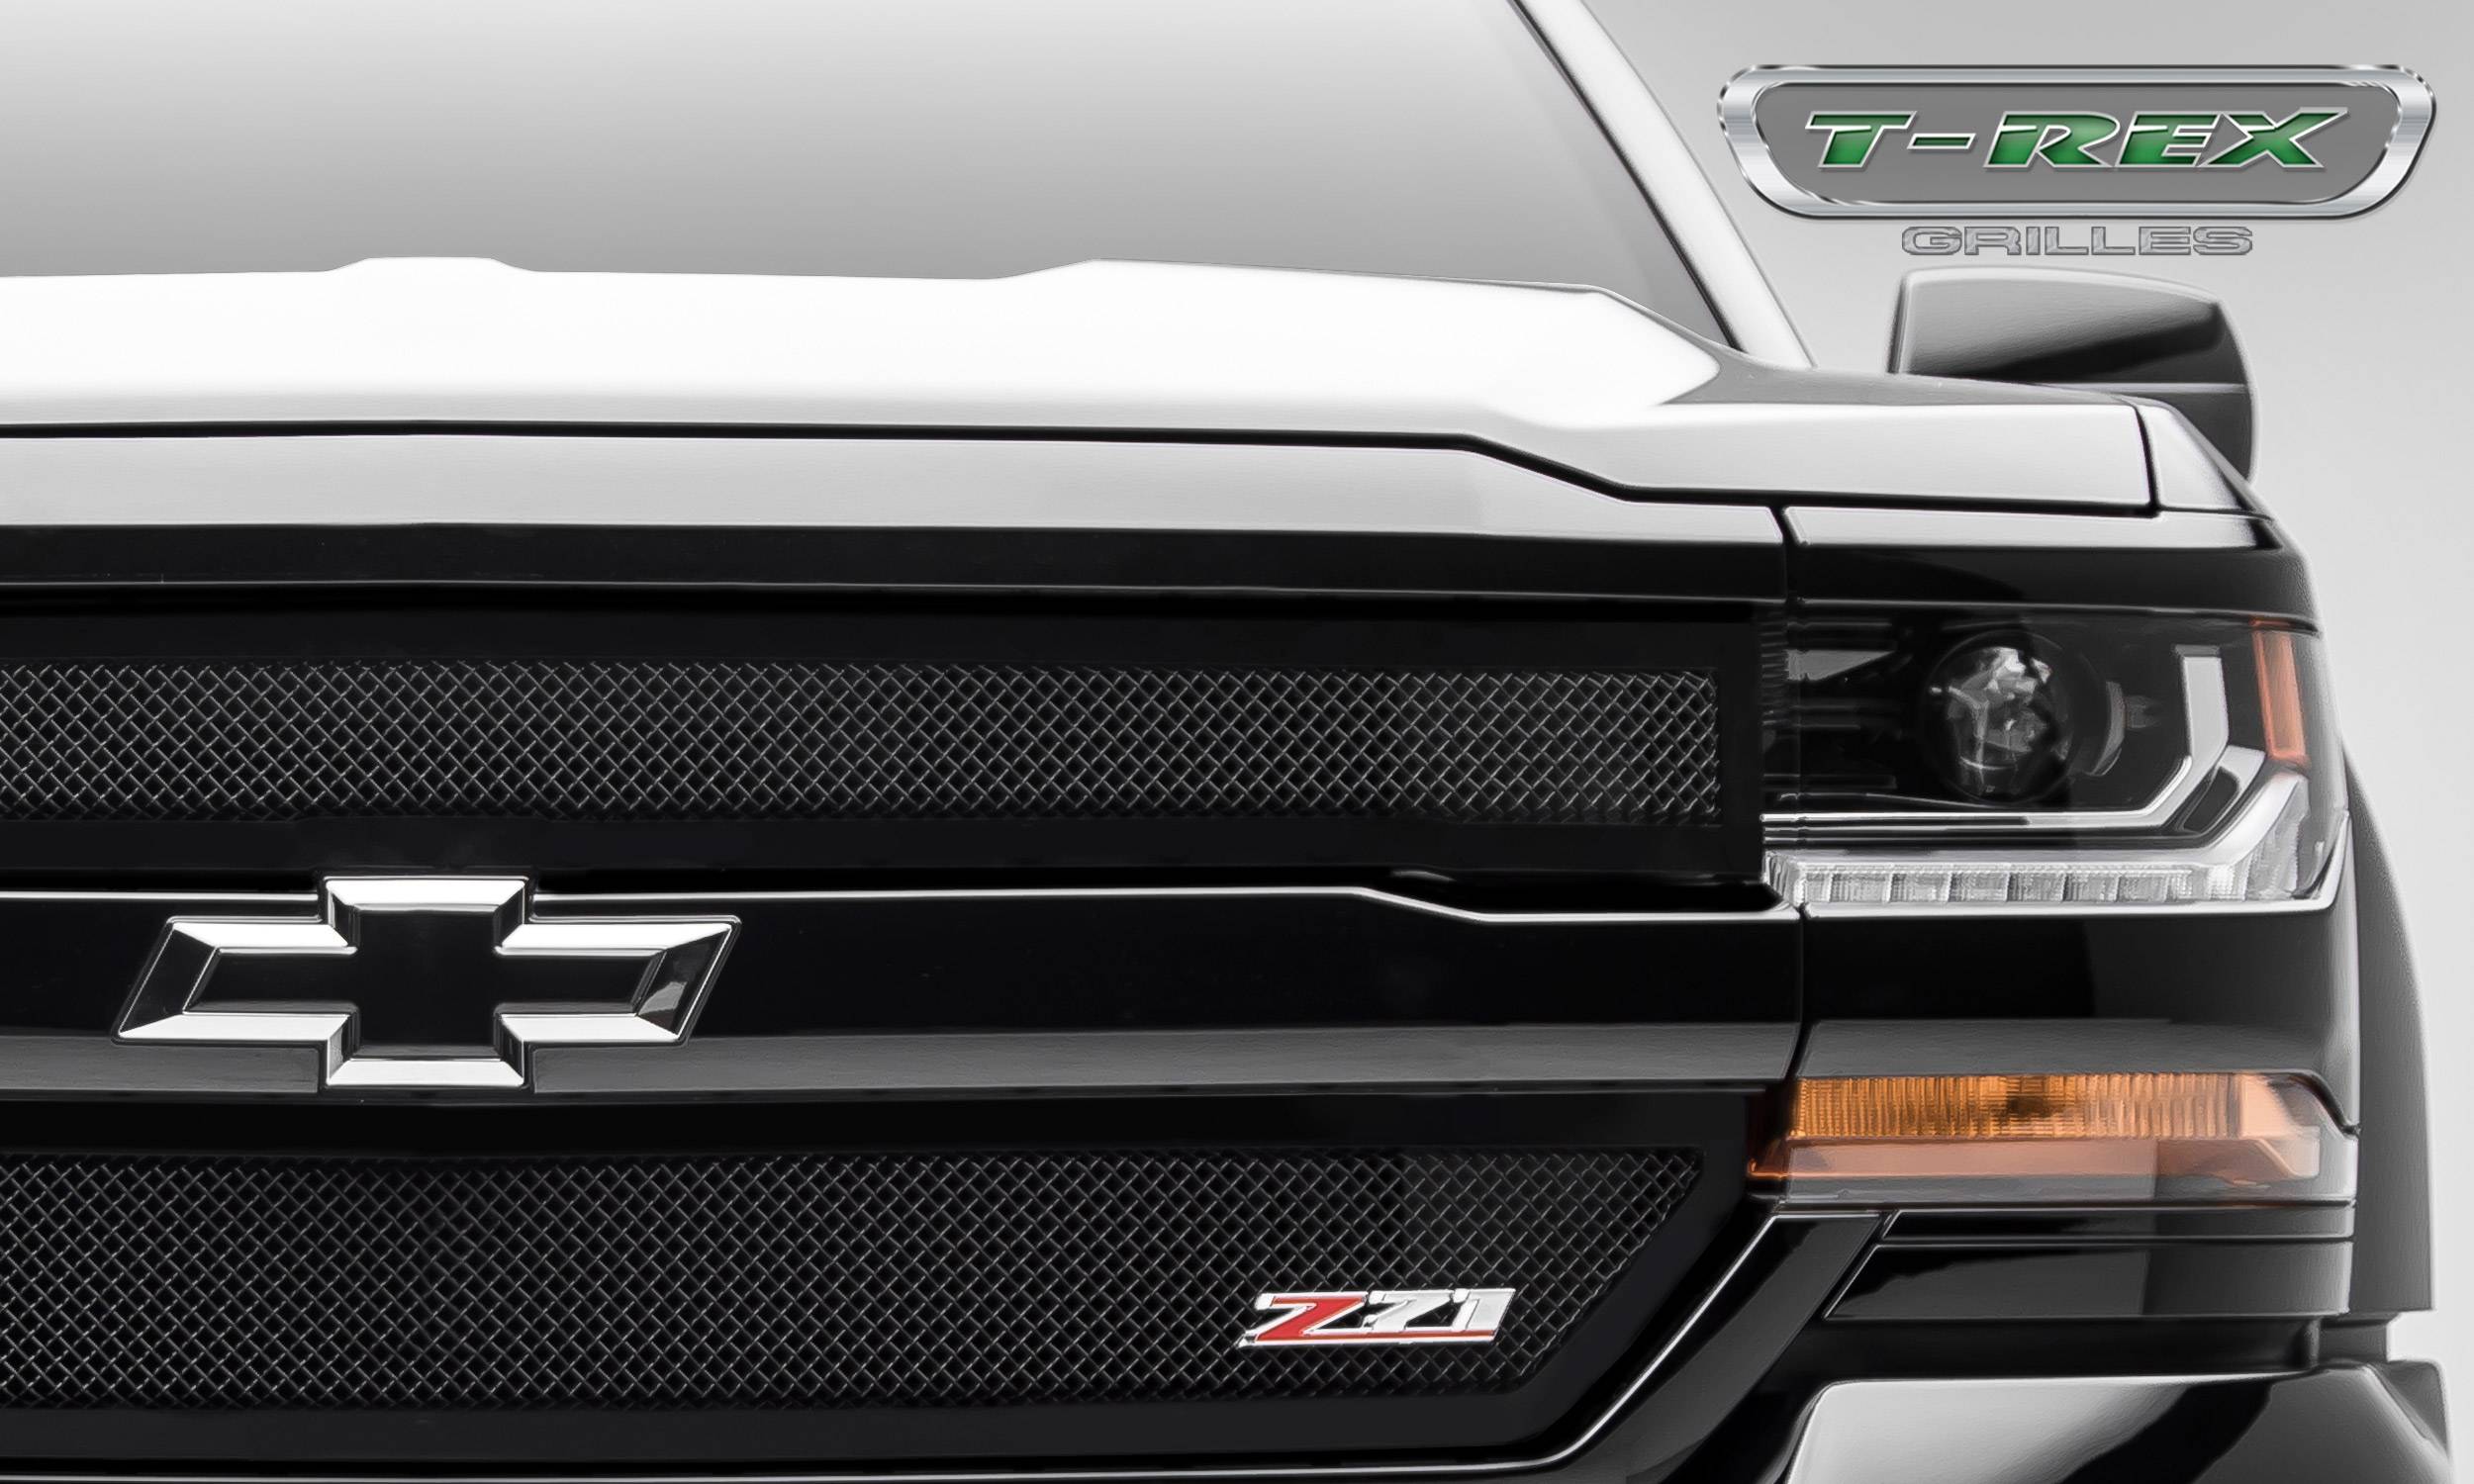 2016-2018 Chevrolet Silverado 1500 Z71 Upper Class Series, Powder Coated  Black, 2 Pc Main Grille Insert - Fits Z71 Only - Pt # 51124